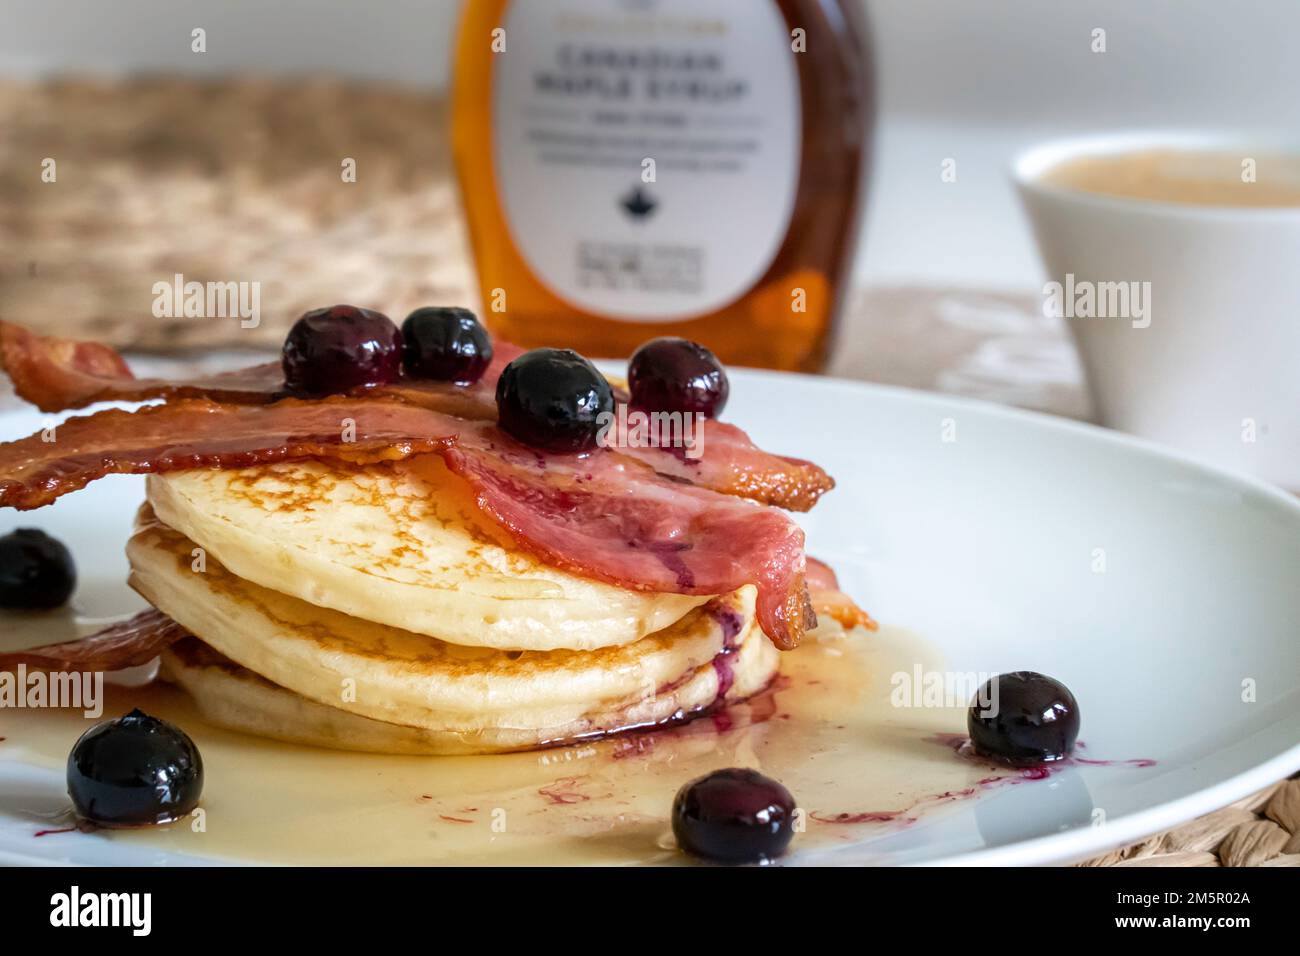 Pancakes and blueberry with maple syrup breakfast meal Stock Photo